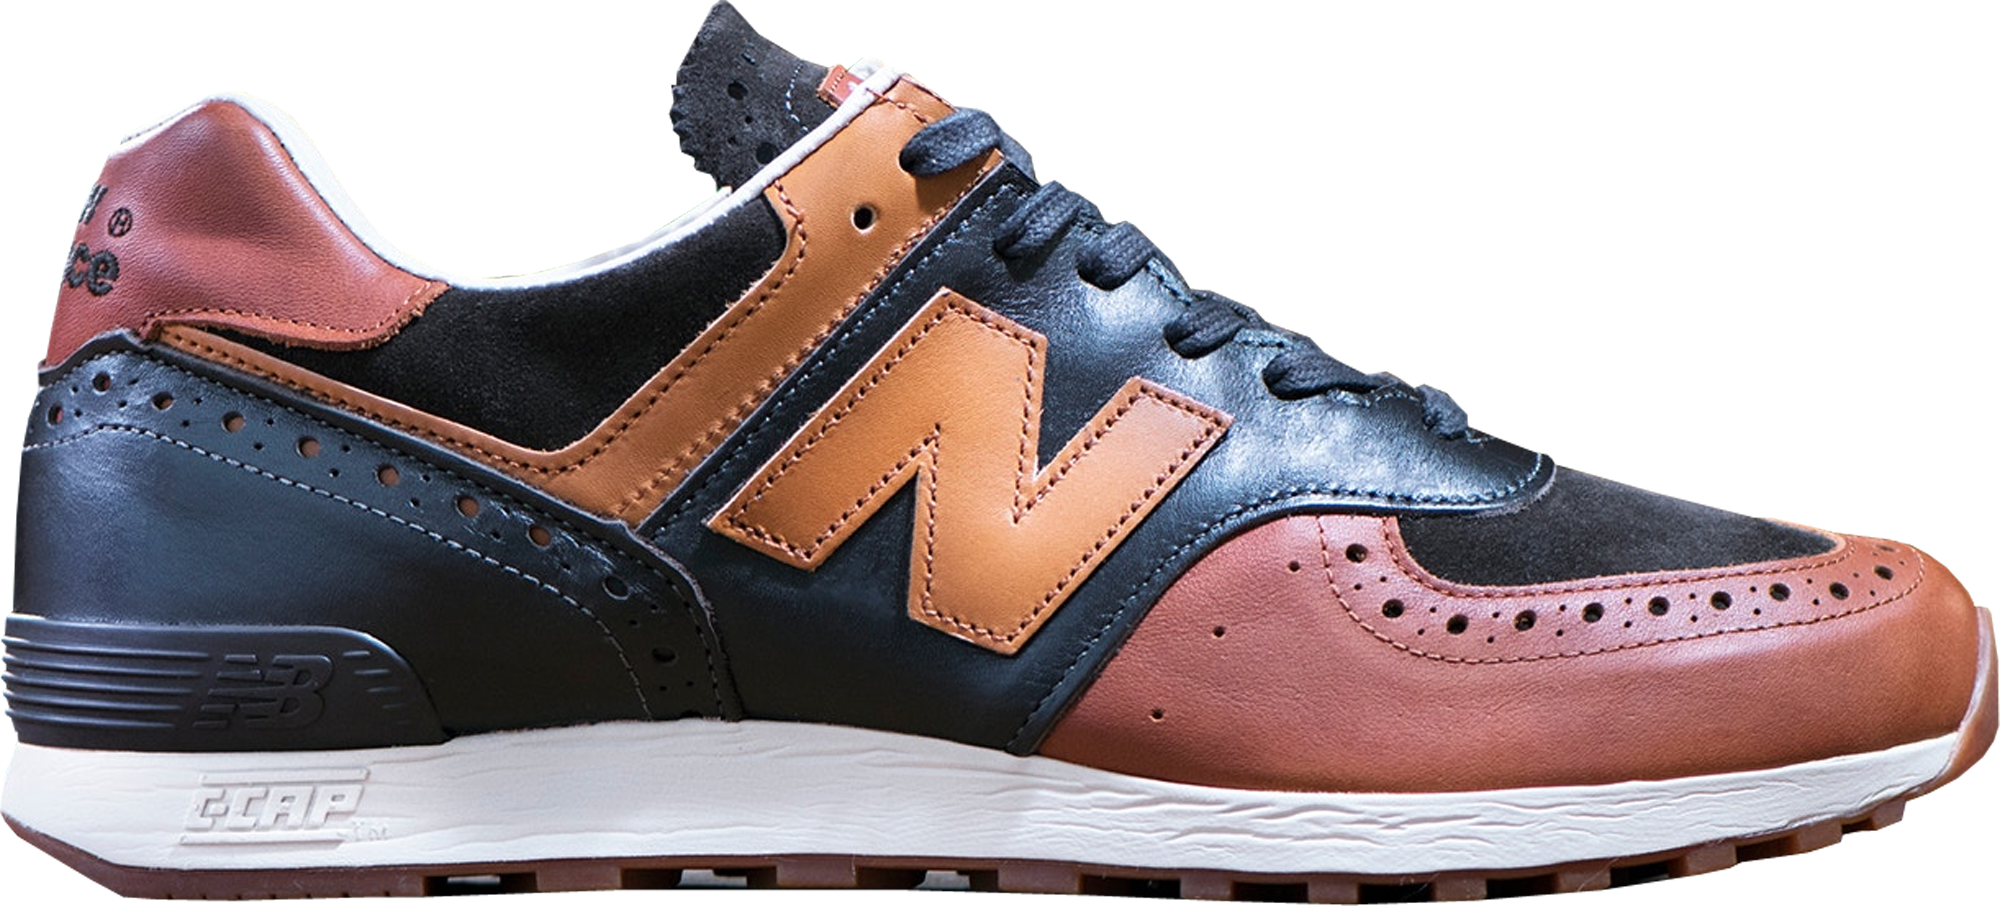 New Balance 576 Grenson Phase Two Brown 